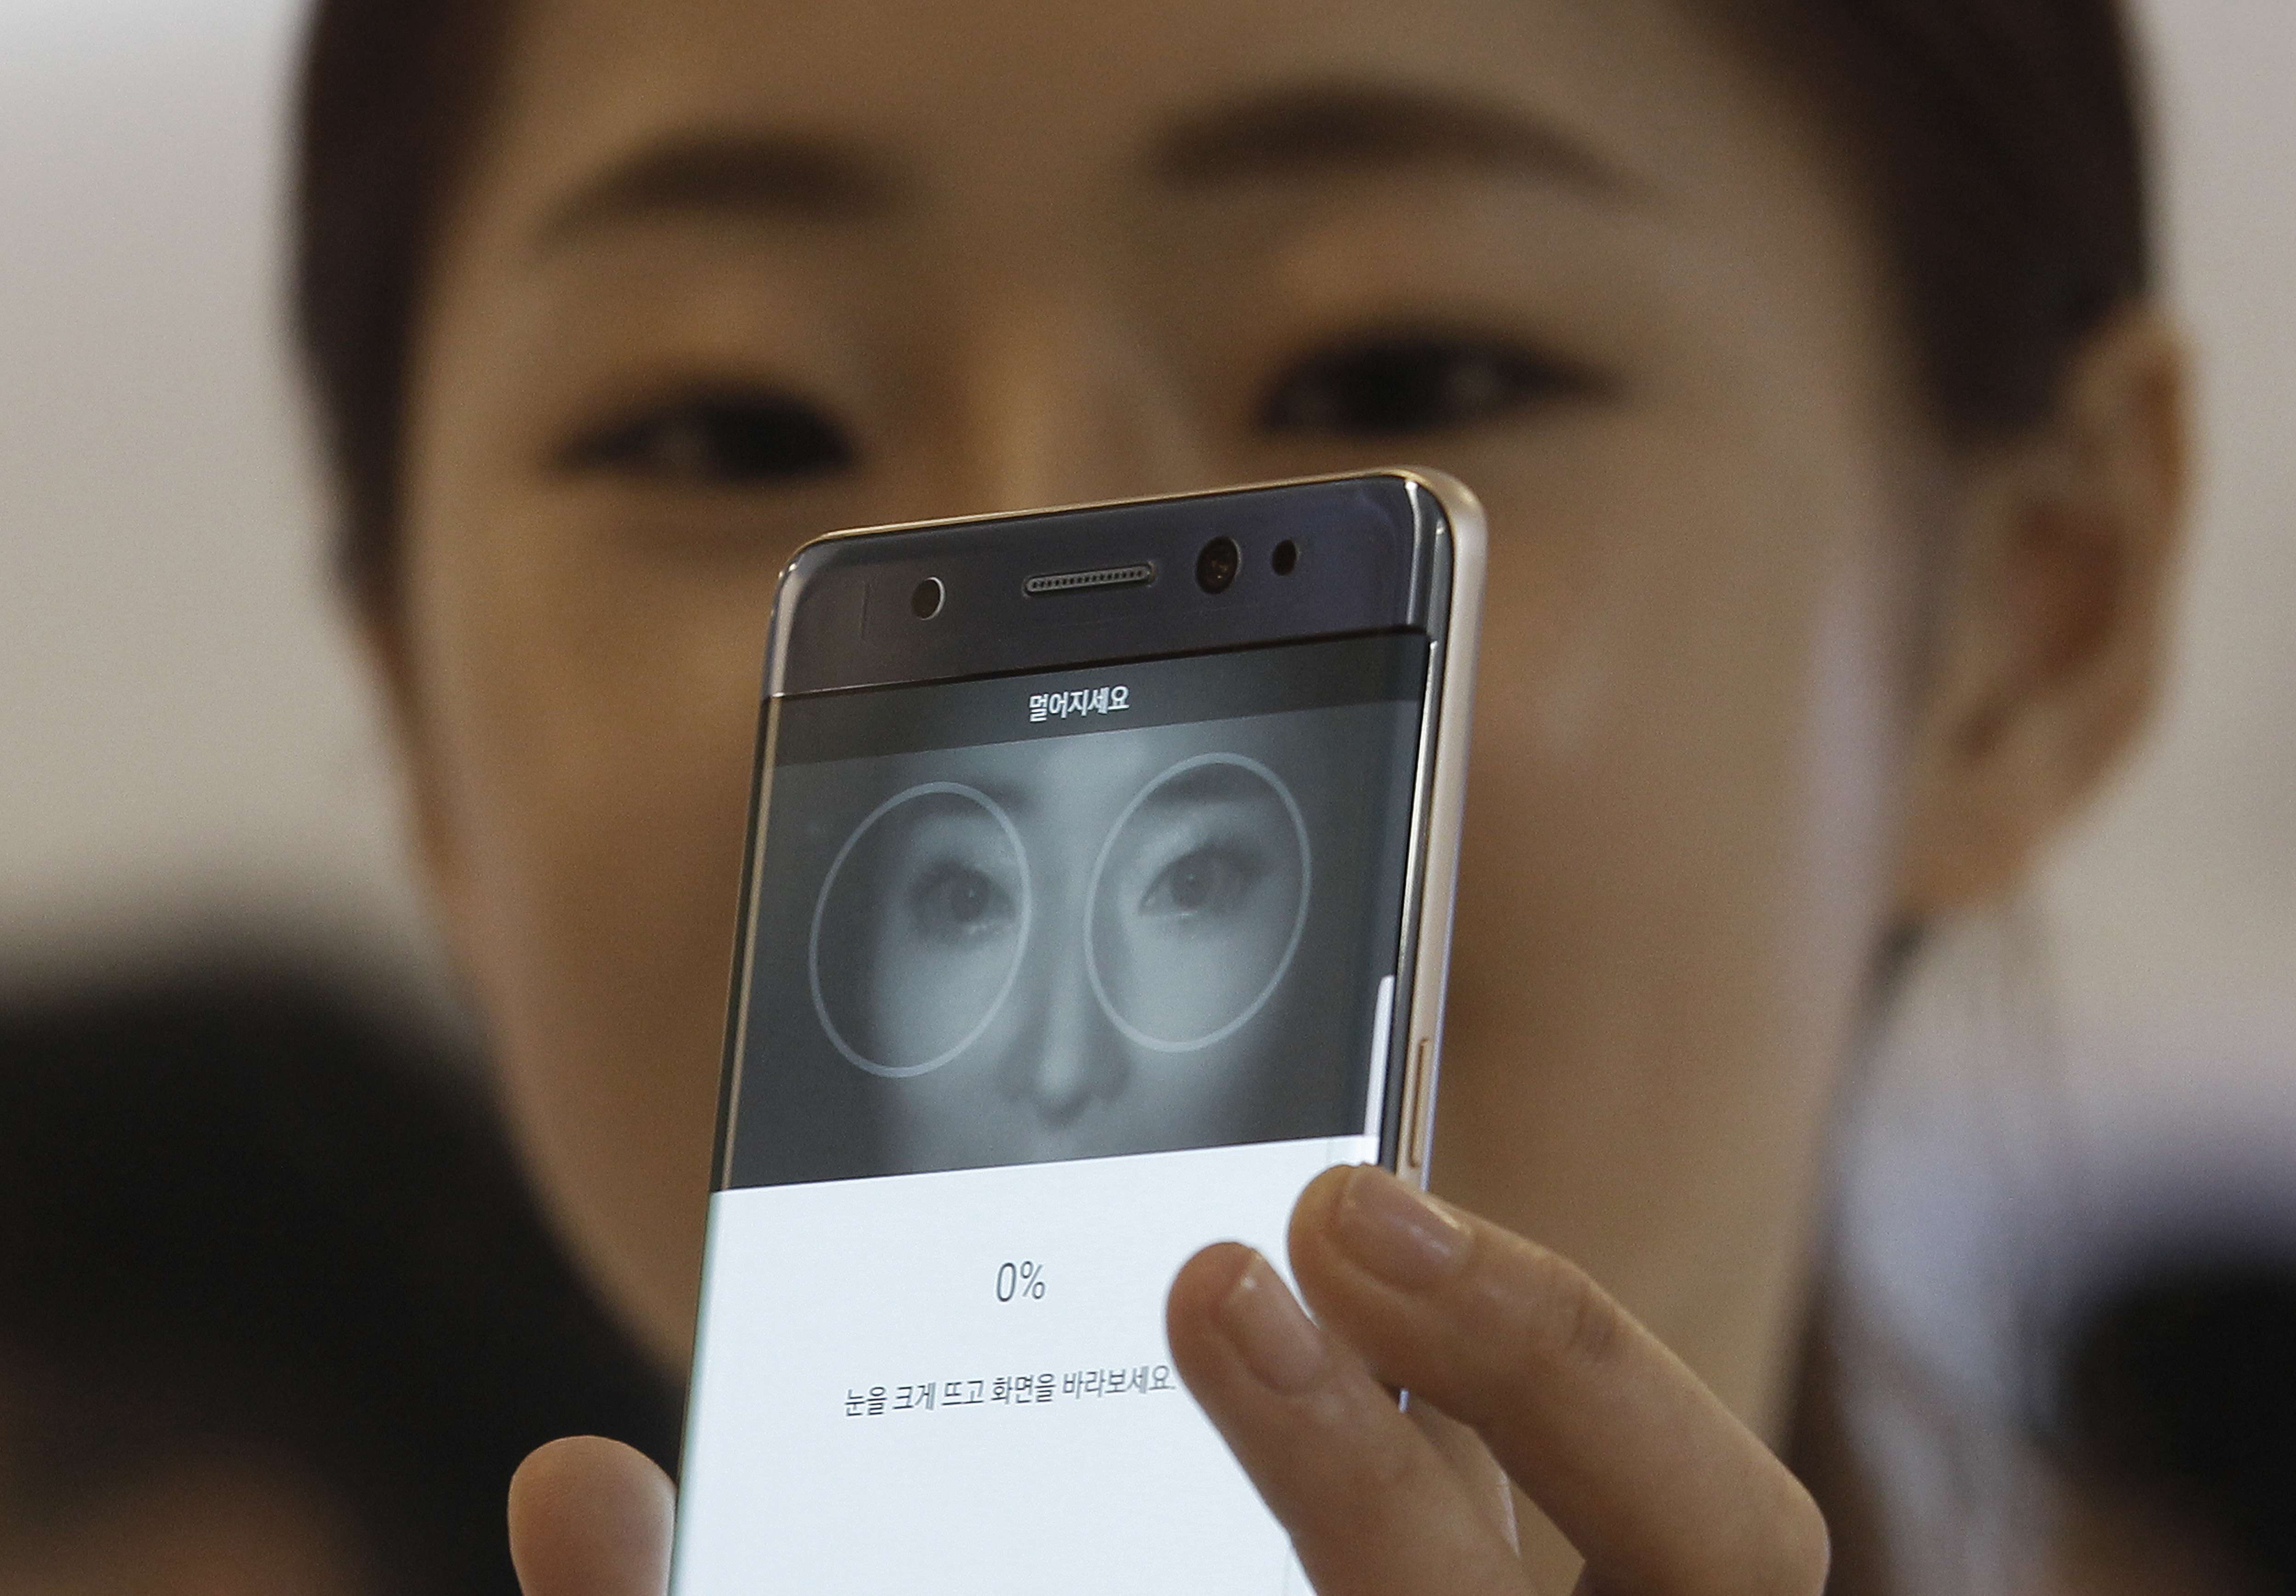 A model demonstrates the iris scanner features of the Galaxy Note 7 during its launch in August. Two months later, the phone has cast a deep shadow on Samsung’s reputation. Photo: AP